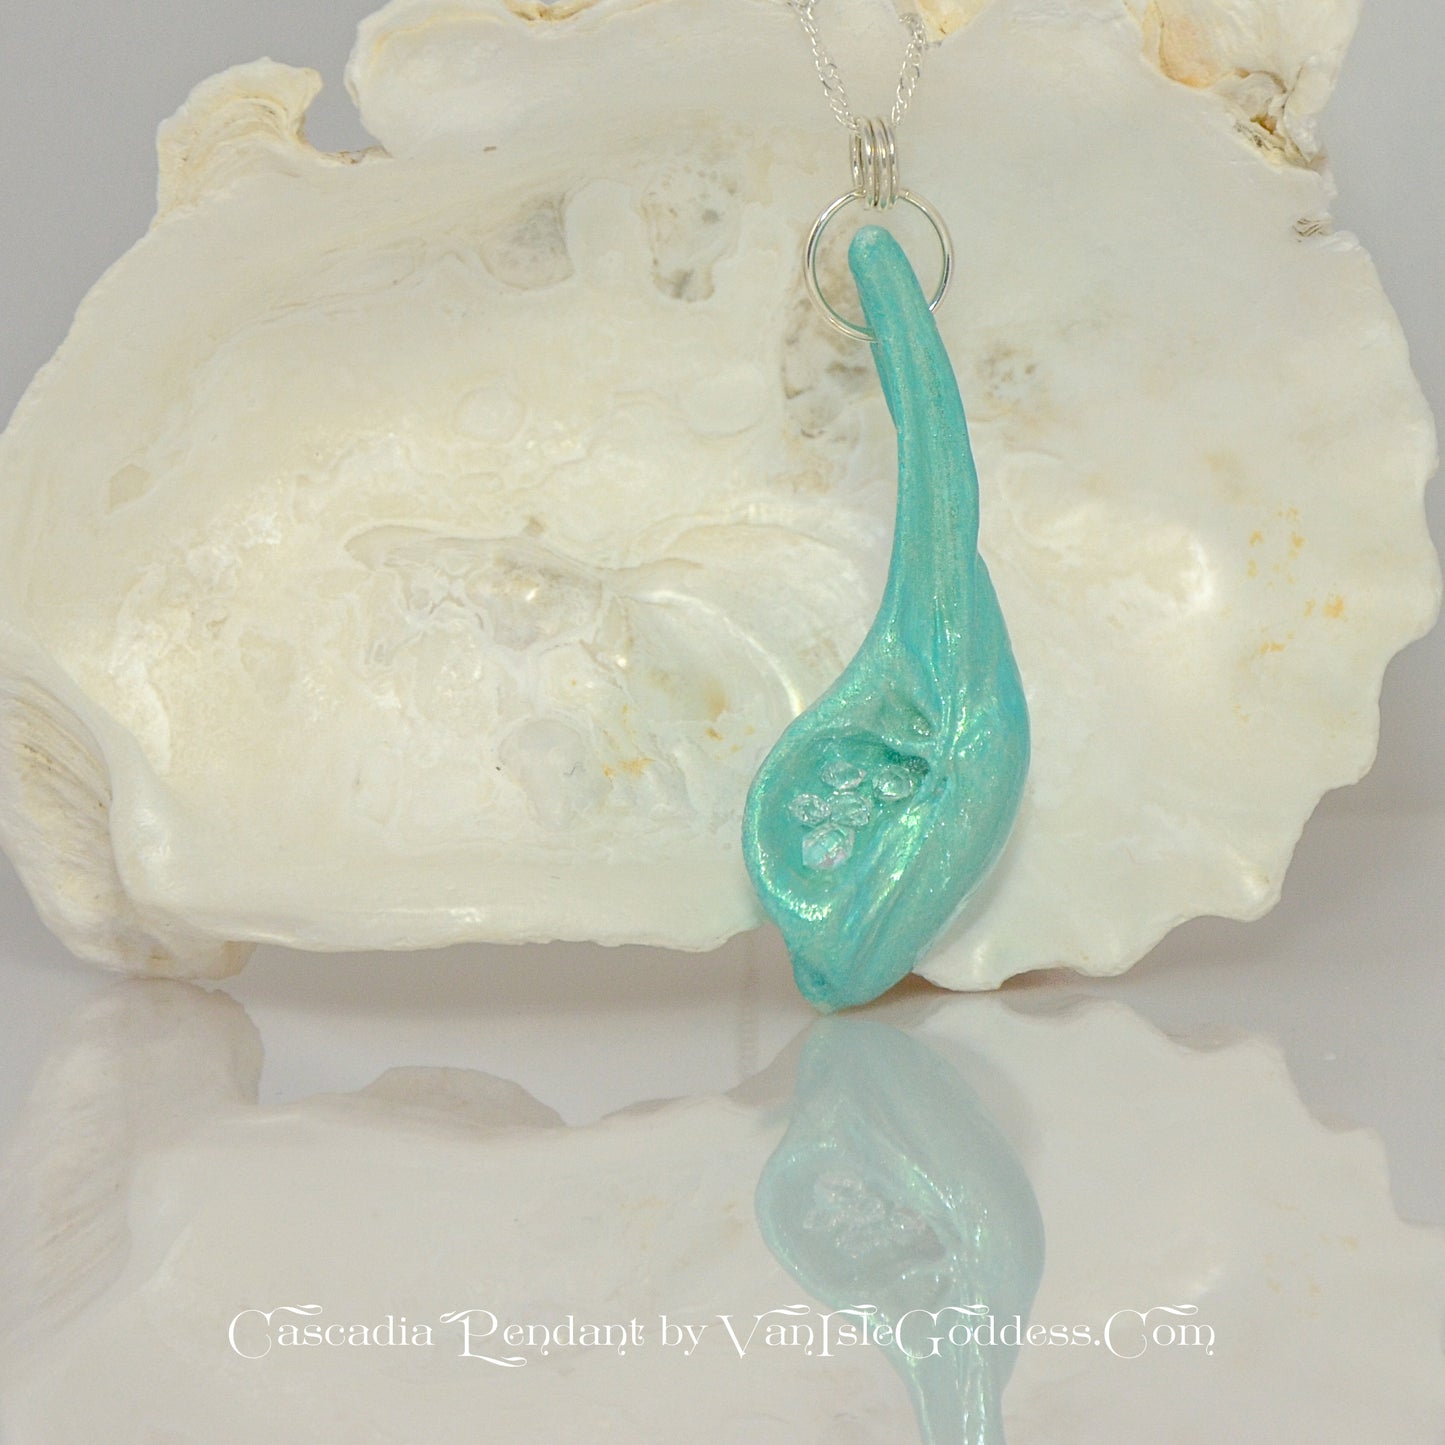 The Cascadia Pendant created with a natural seashell from the beaches of Vancouver Island.  The seashell is turquoise and has high quality herkimer diamonds. The pendant is hanging from a larger seashell.  The print on the bottom of the image says: Cascadia Pendant by Van Isle Goddess dot com